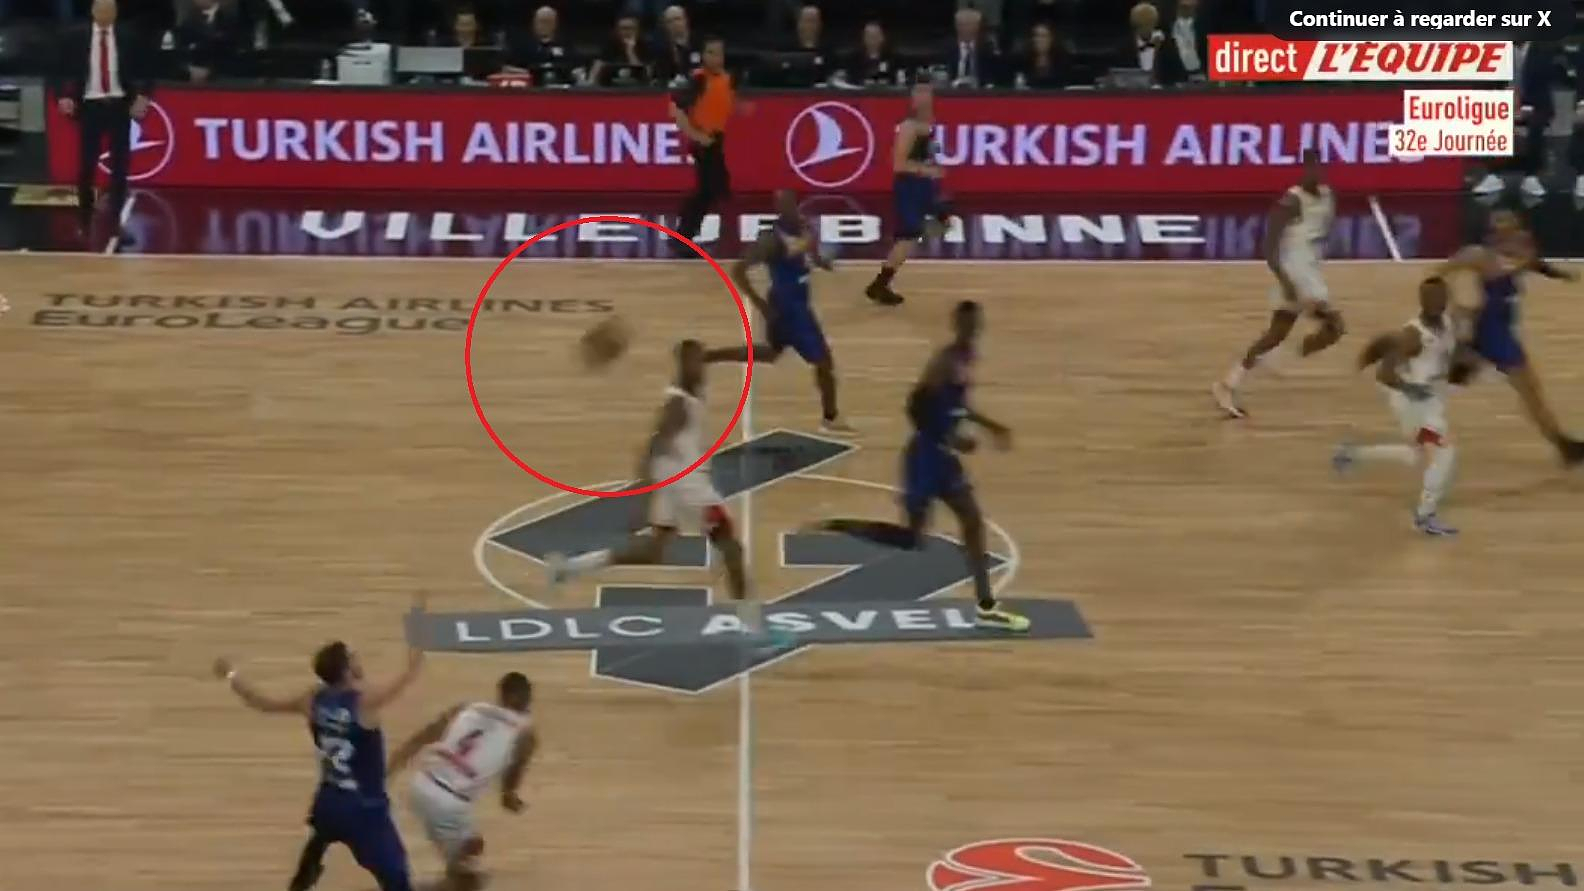 Basketball: in video, the incredible 17-meter “four-point” basket scored by Nando de Colo with Villeurbanne